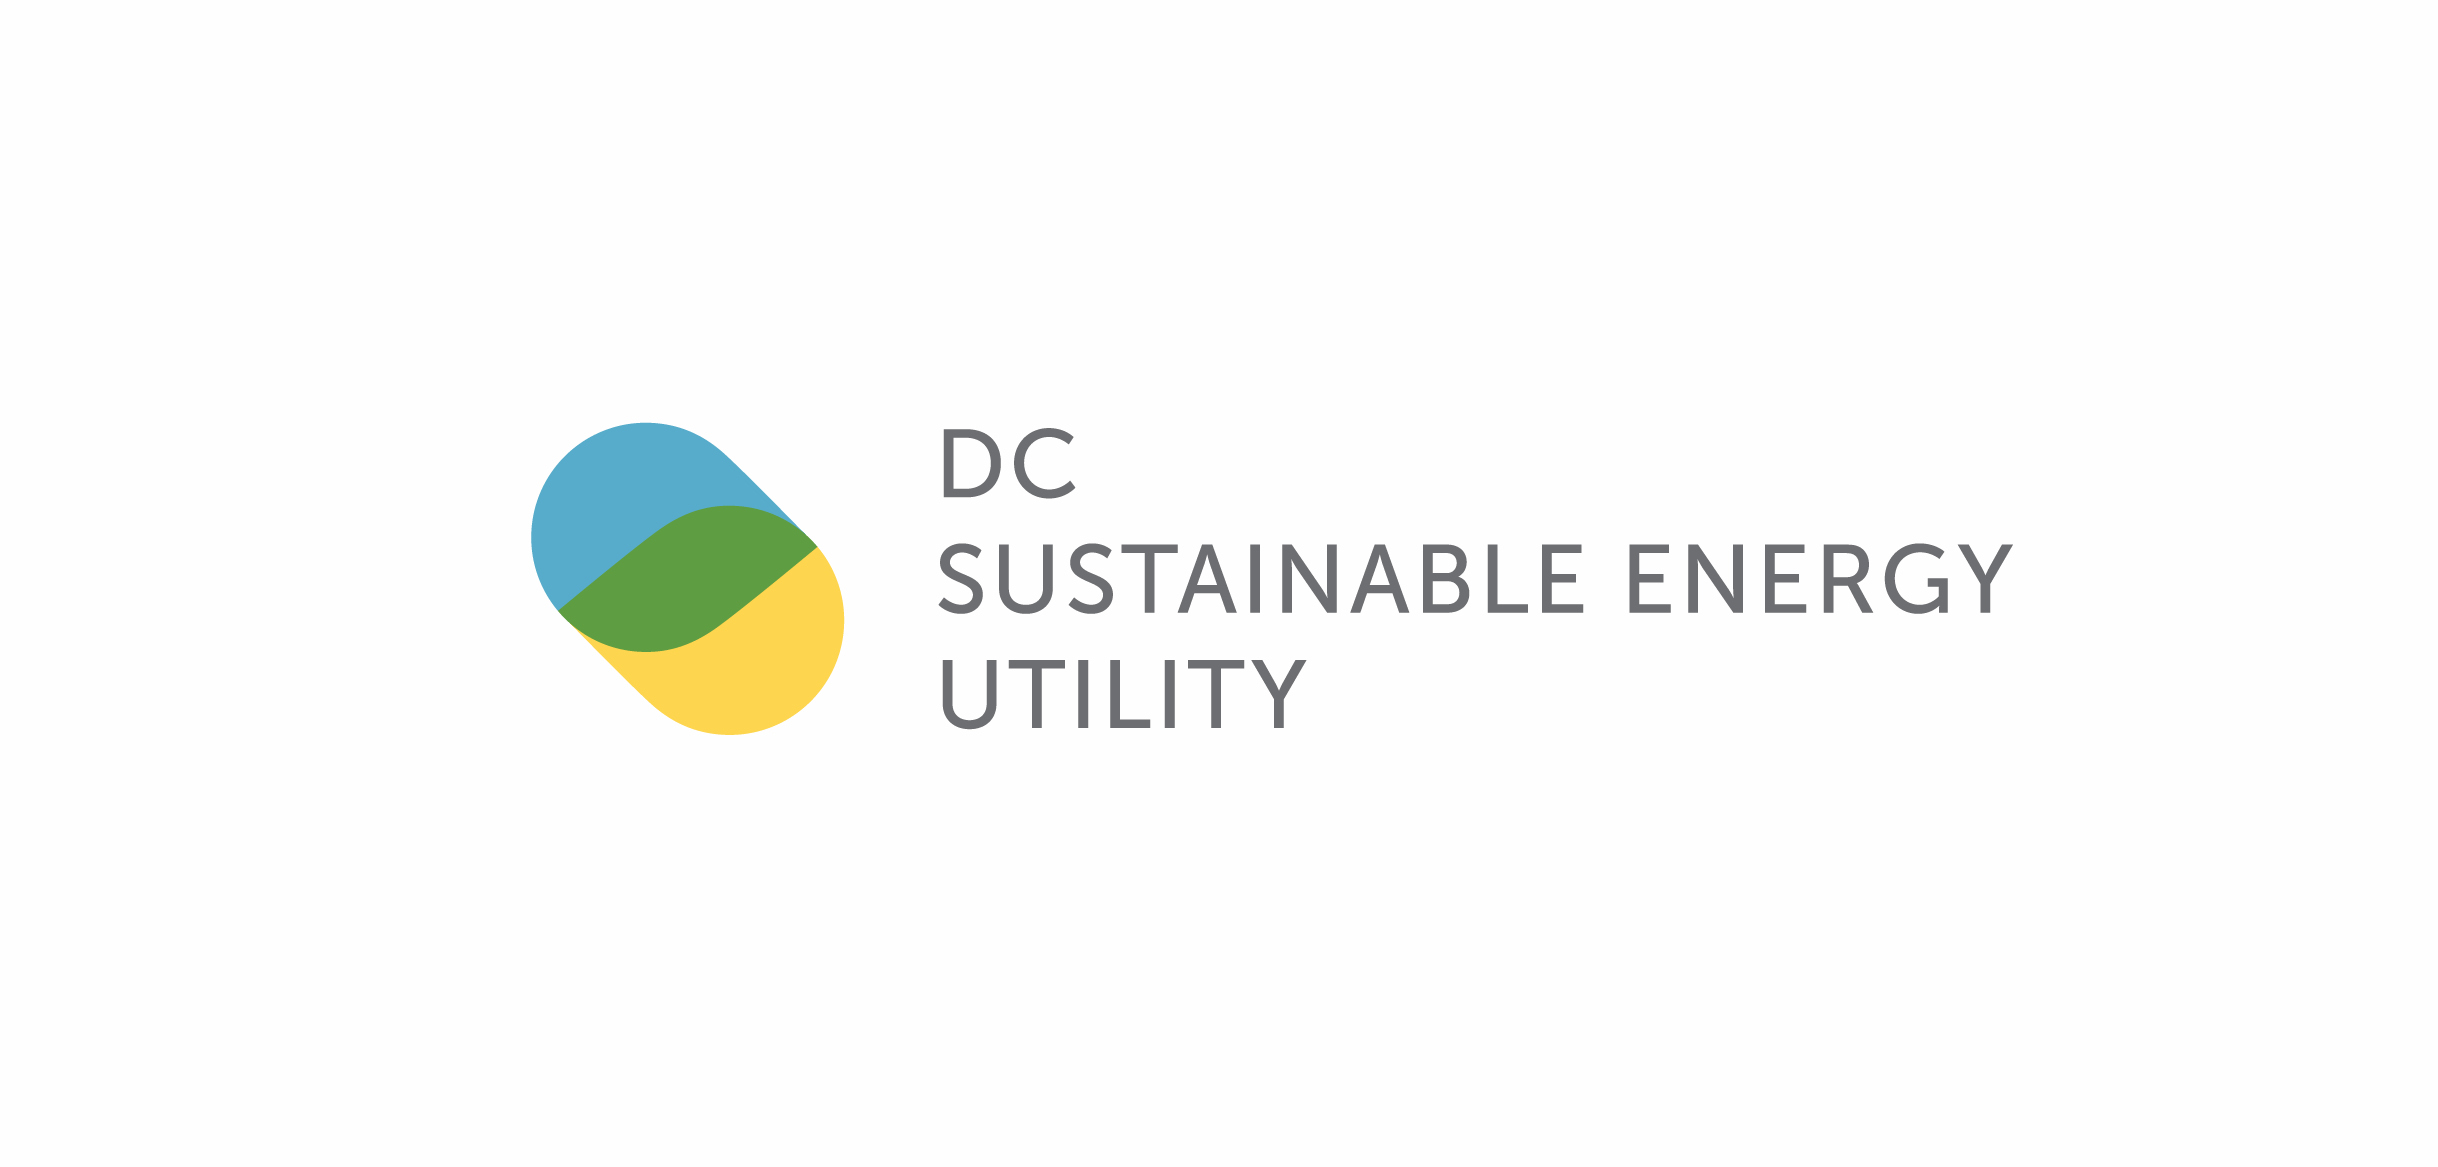 The DCSEU logo consists of two overlapping drop-like shapes, one blue and the other yellow. Where they overlap they create a green path. The words DC Sustainable Energy Utility are set in a san serif typeface to right of the mark.